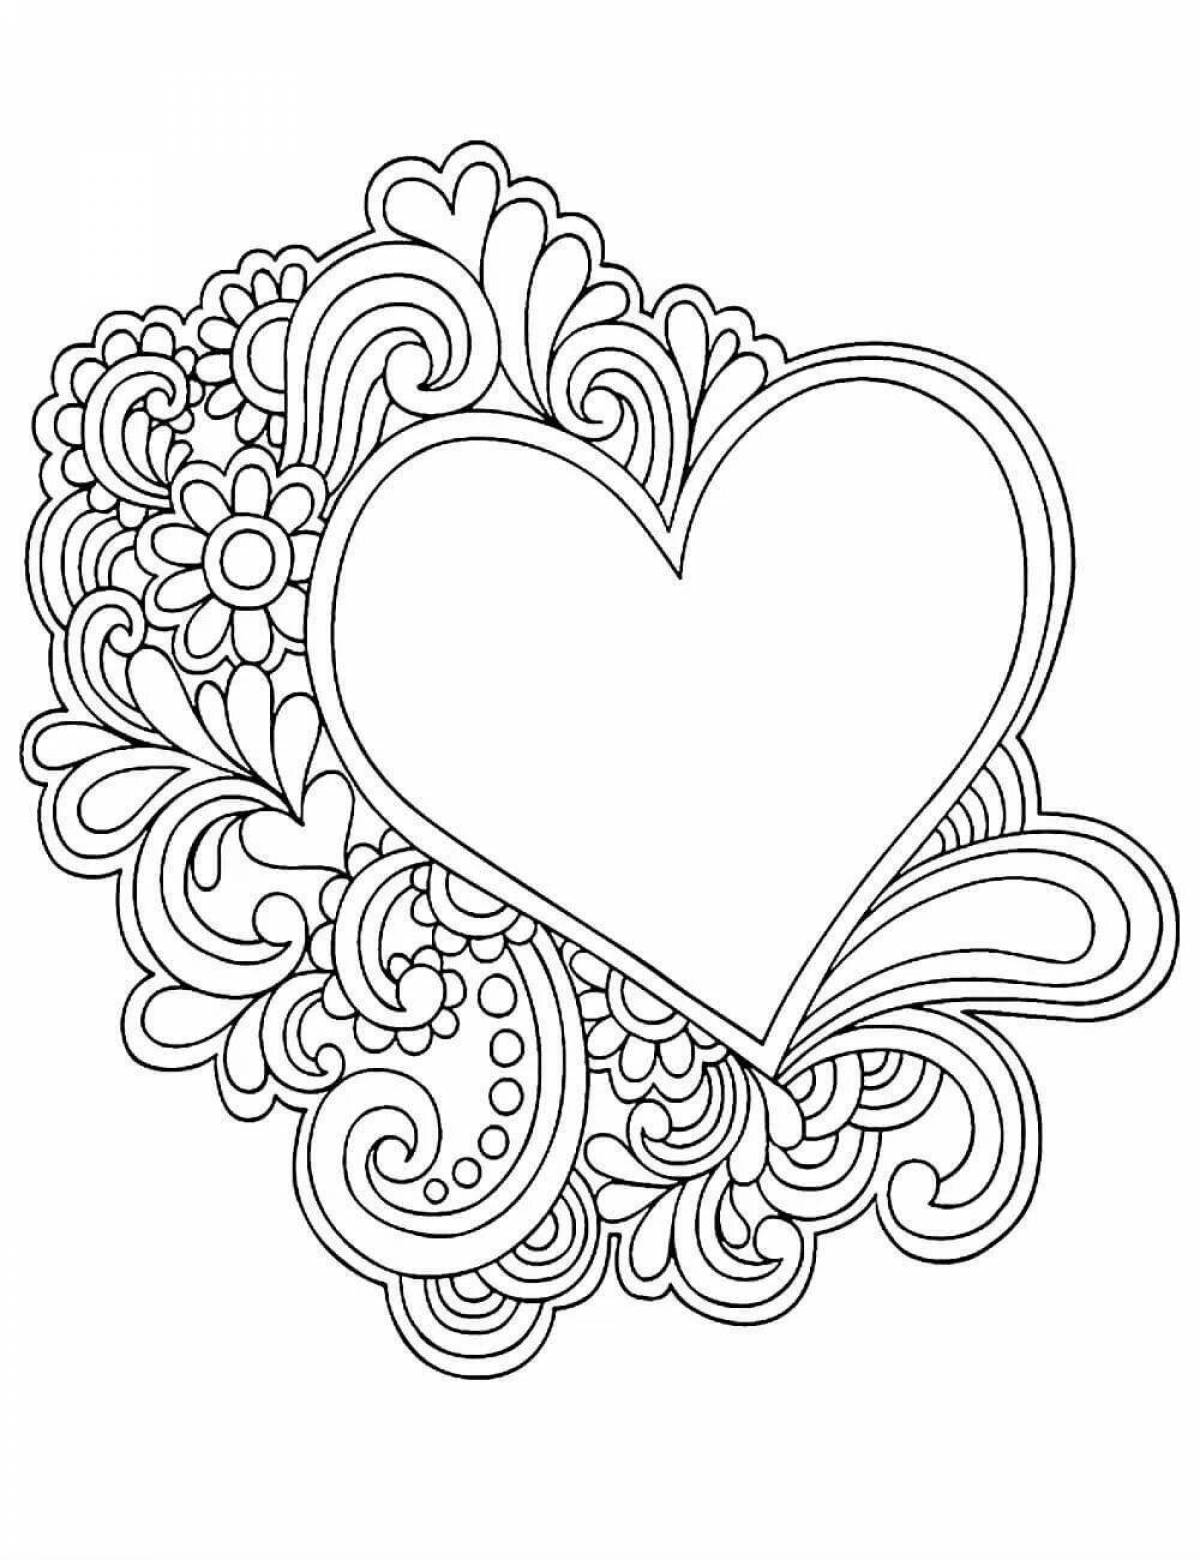 Coloring page generous mother